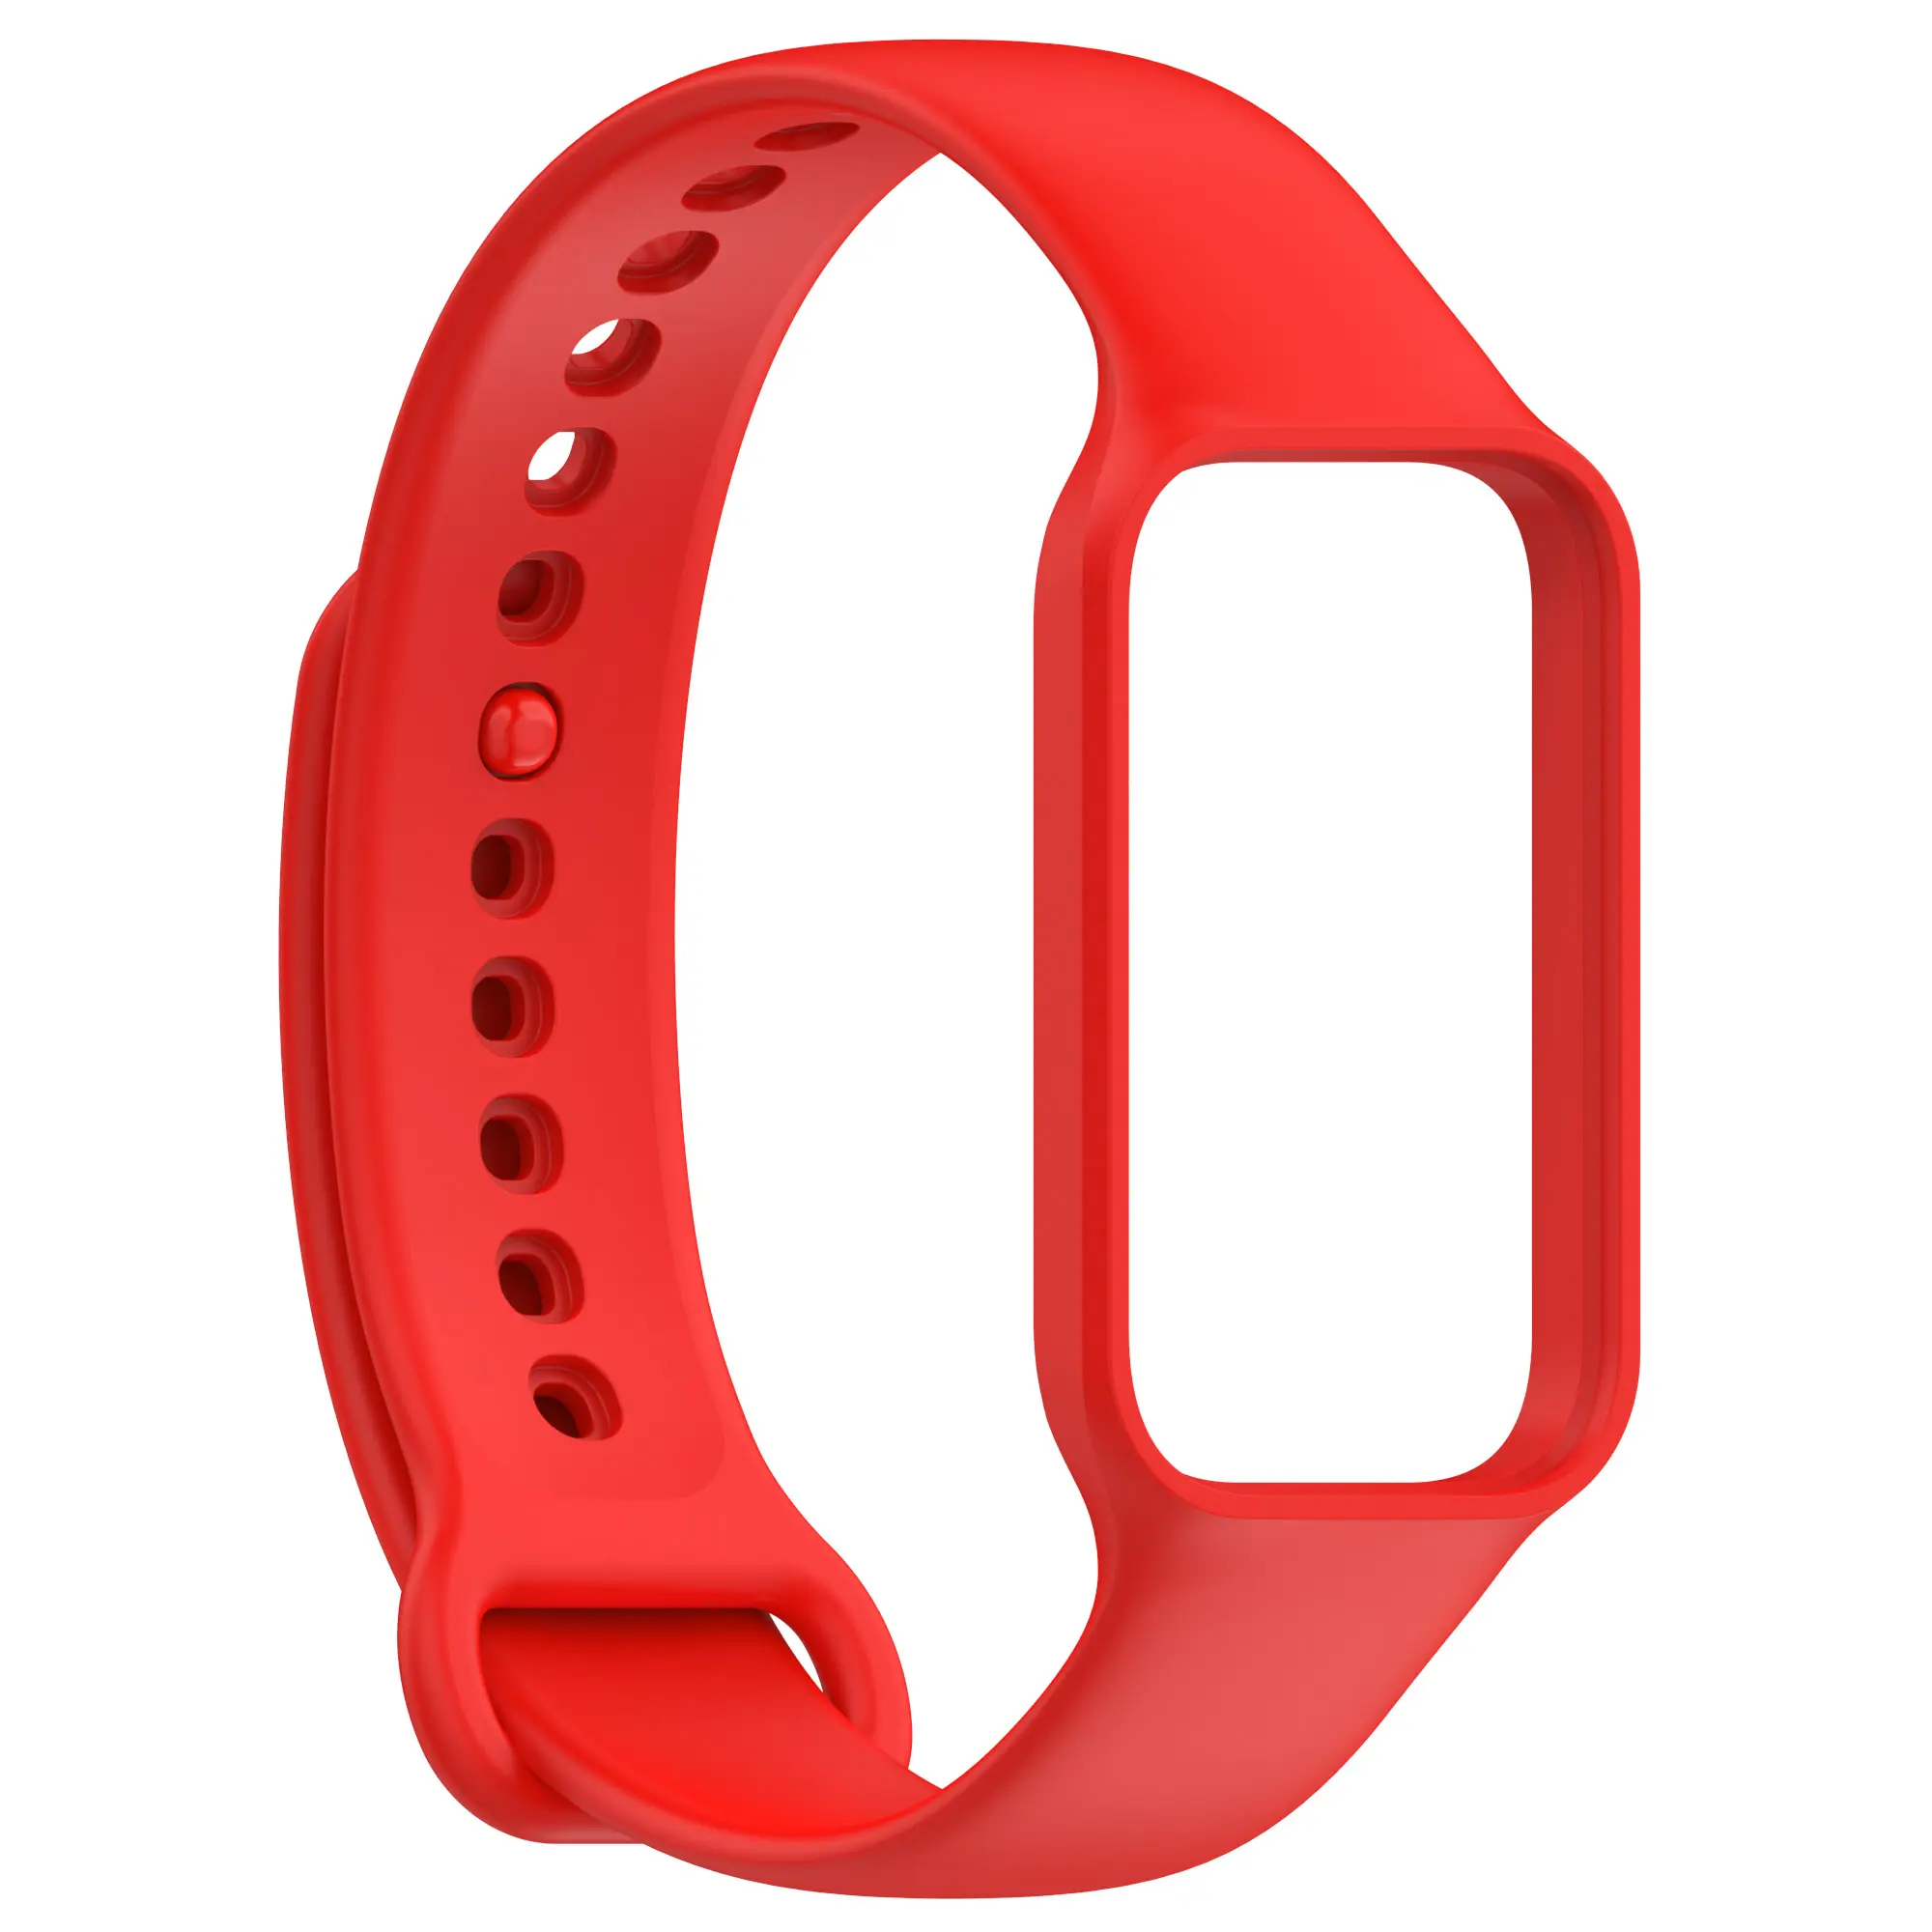 For Red Mi Band 2 Watch Band Strap Sport Smart Accessories Replacement Waterproof Silicone Wristband for Mi Band2 Wrist Strap